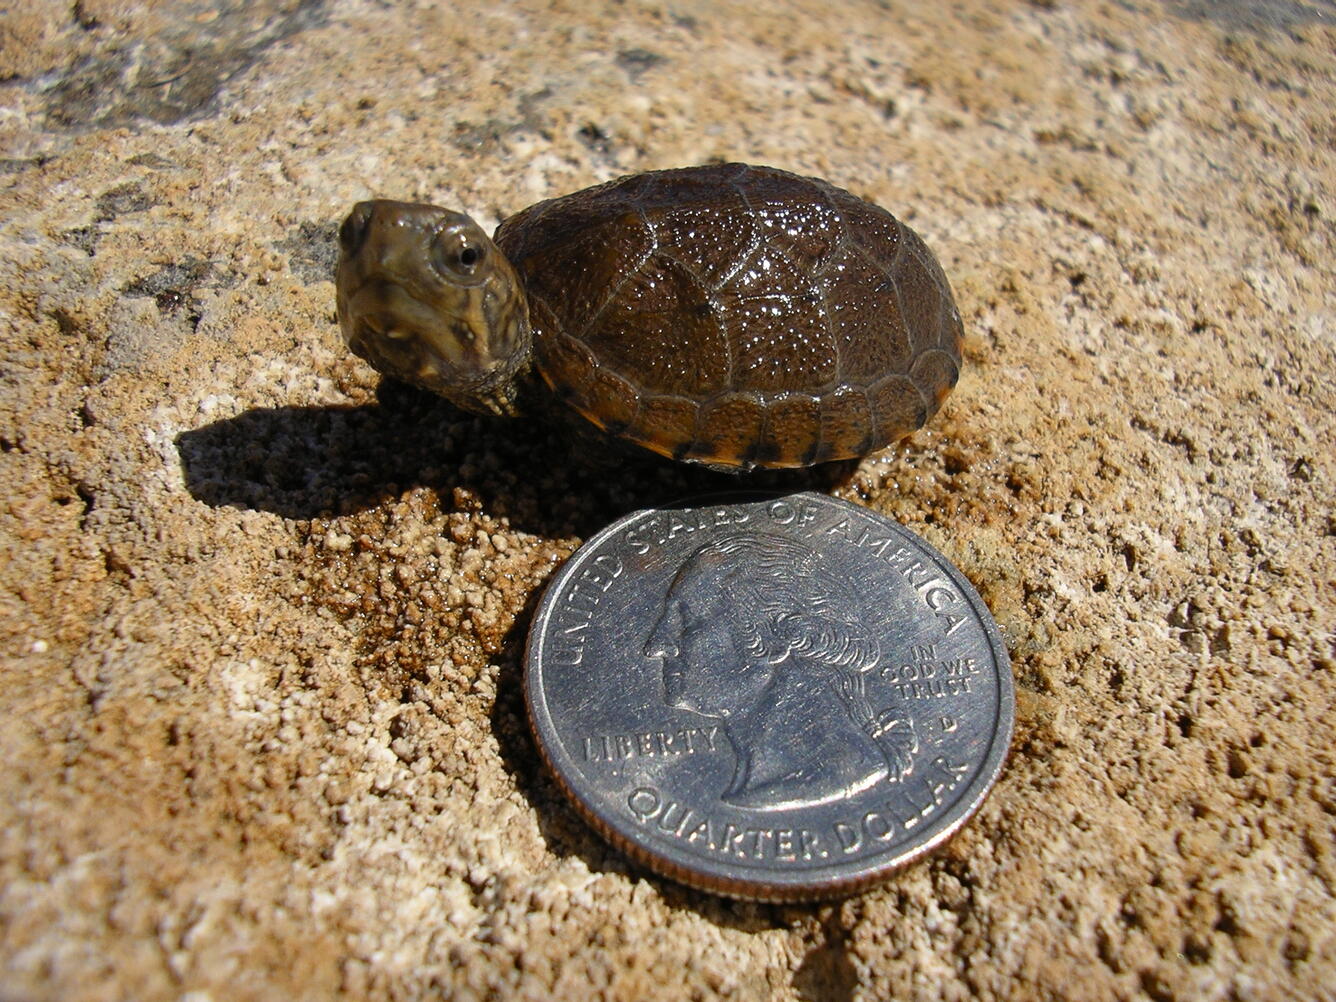 A Sonora Mud Turtle (Kinosternon sonoriense) hatchling, Montezuma Well, next to a quarter for a similar size comparison